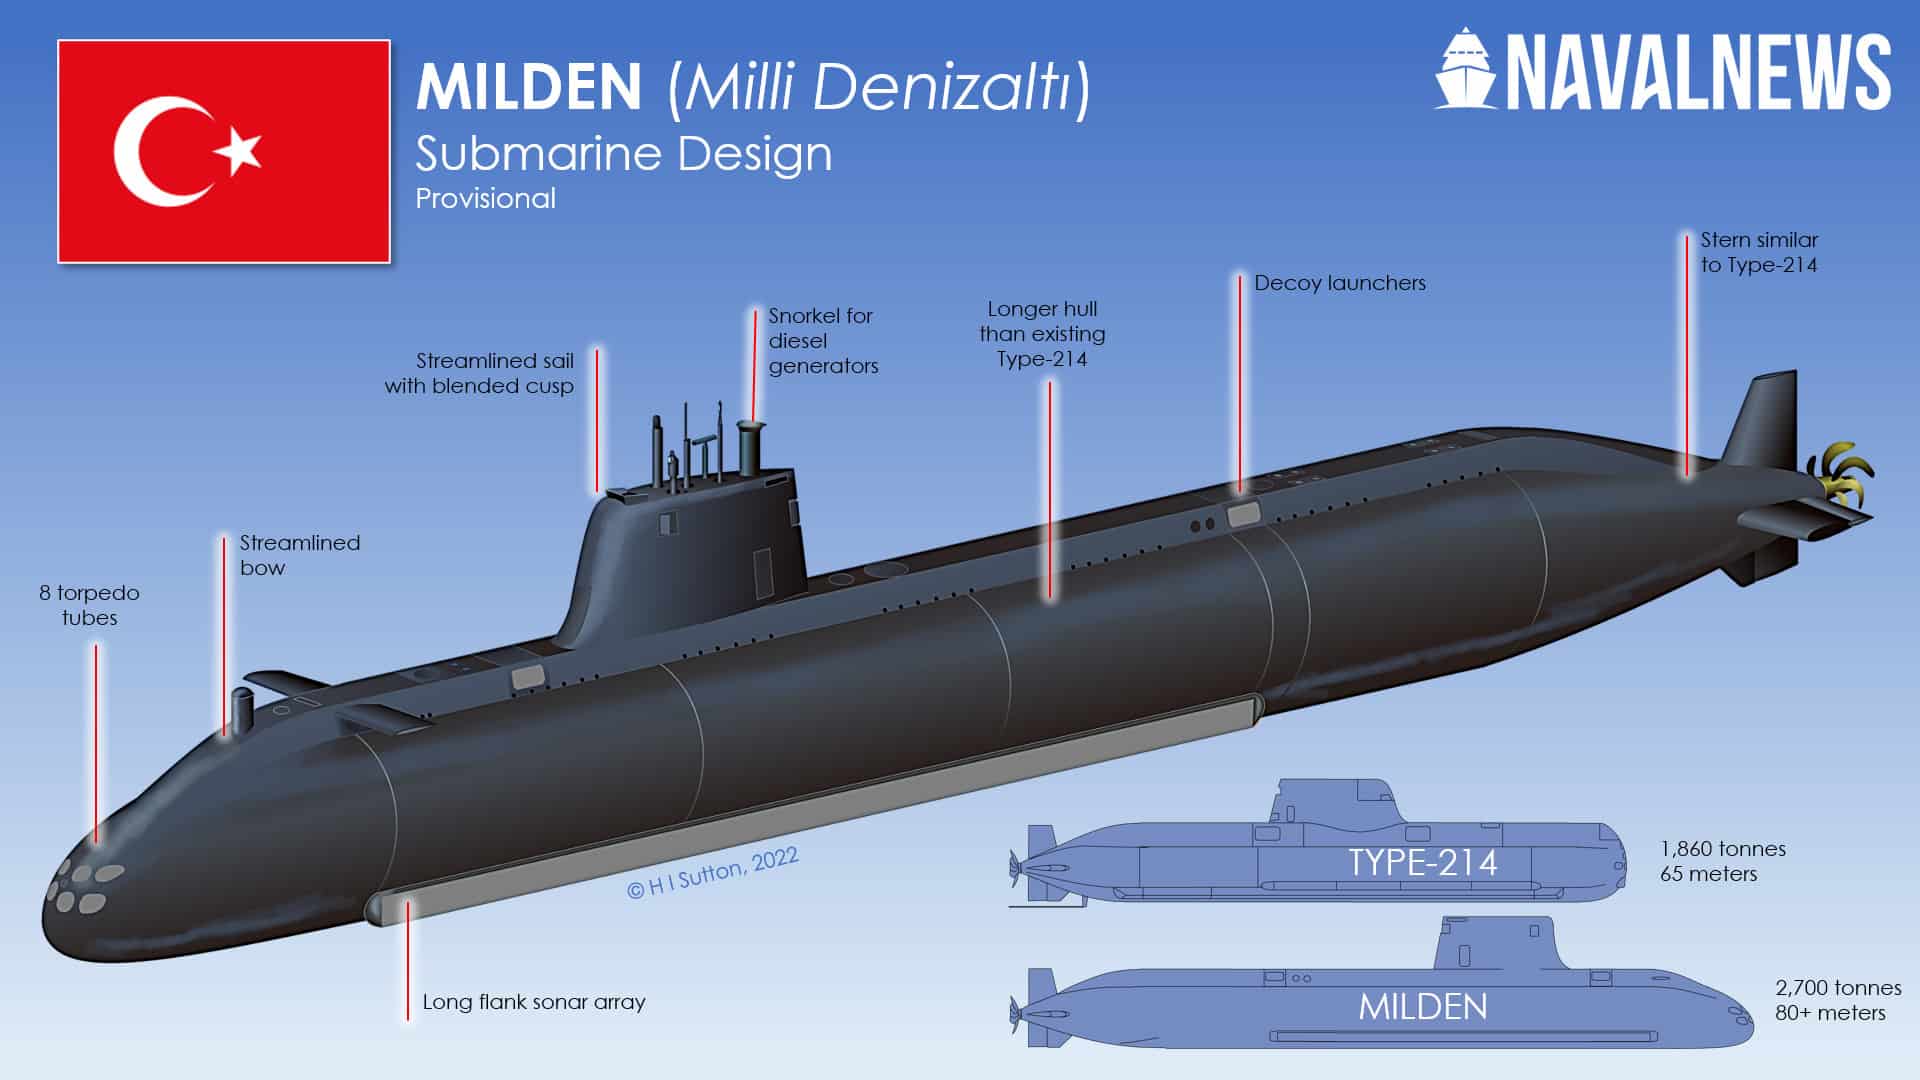 Turkish MILDEN submarine with advanced AKYA torpedoes, Atmaca anti-ship missiles and Gezgin strategic missiles unveiled